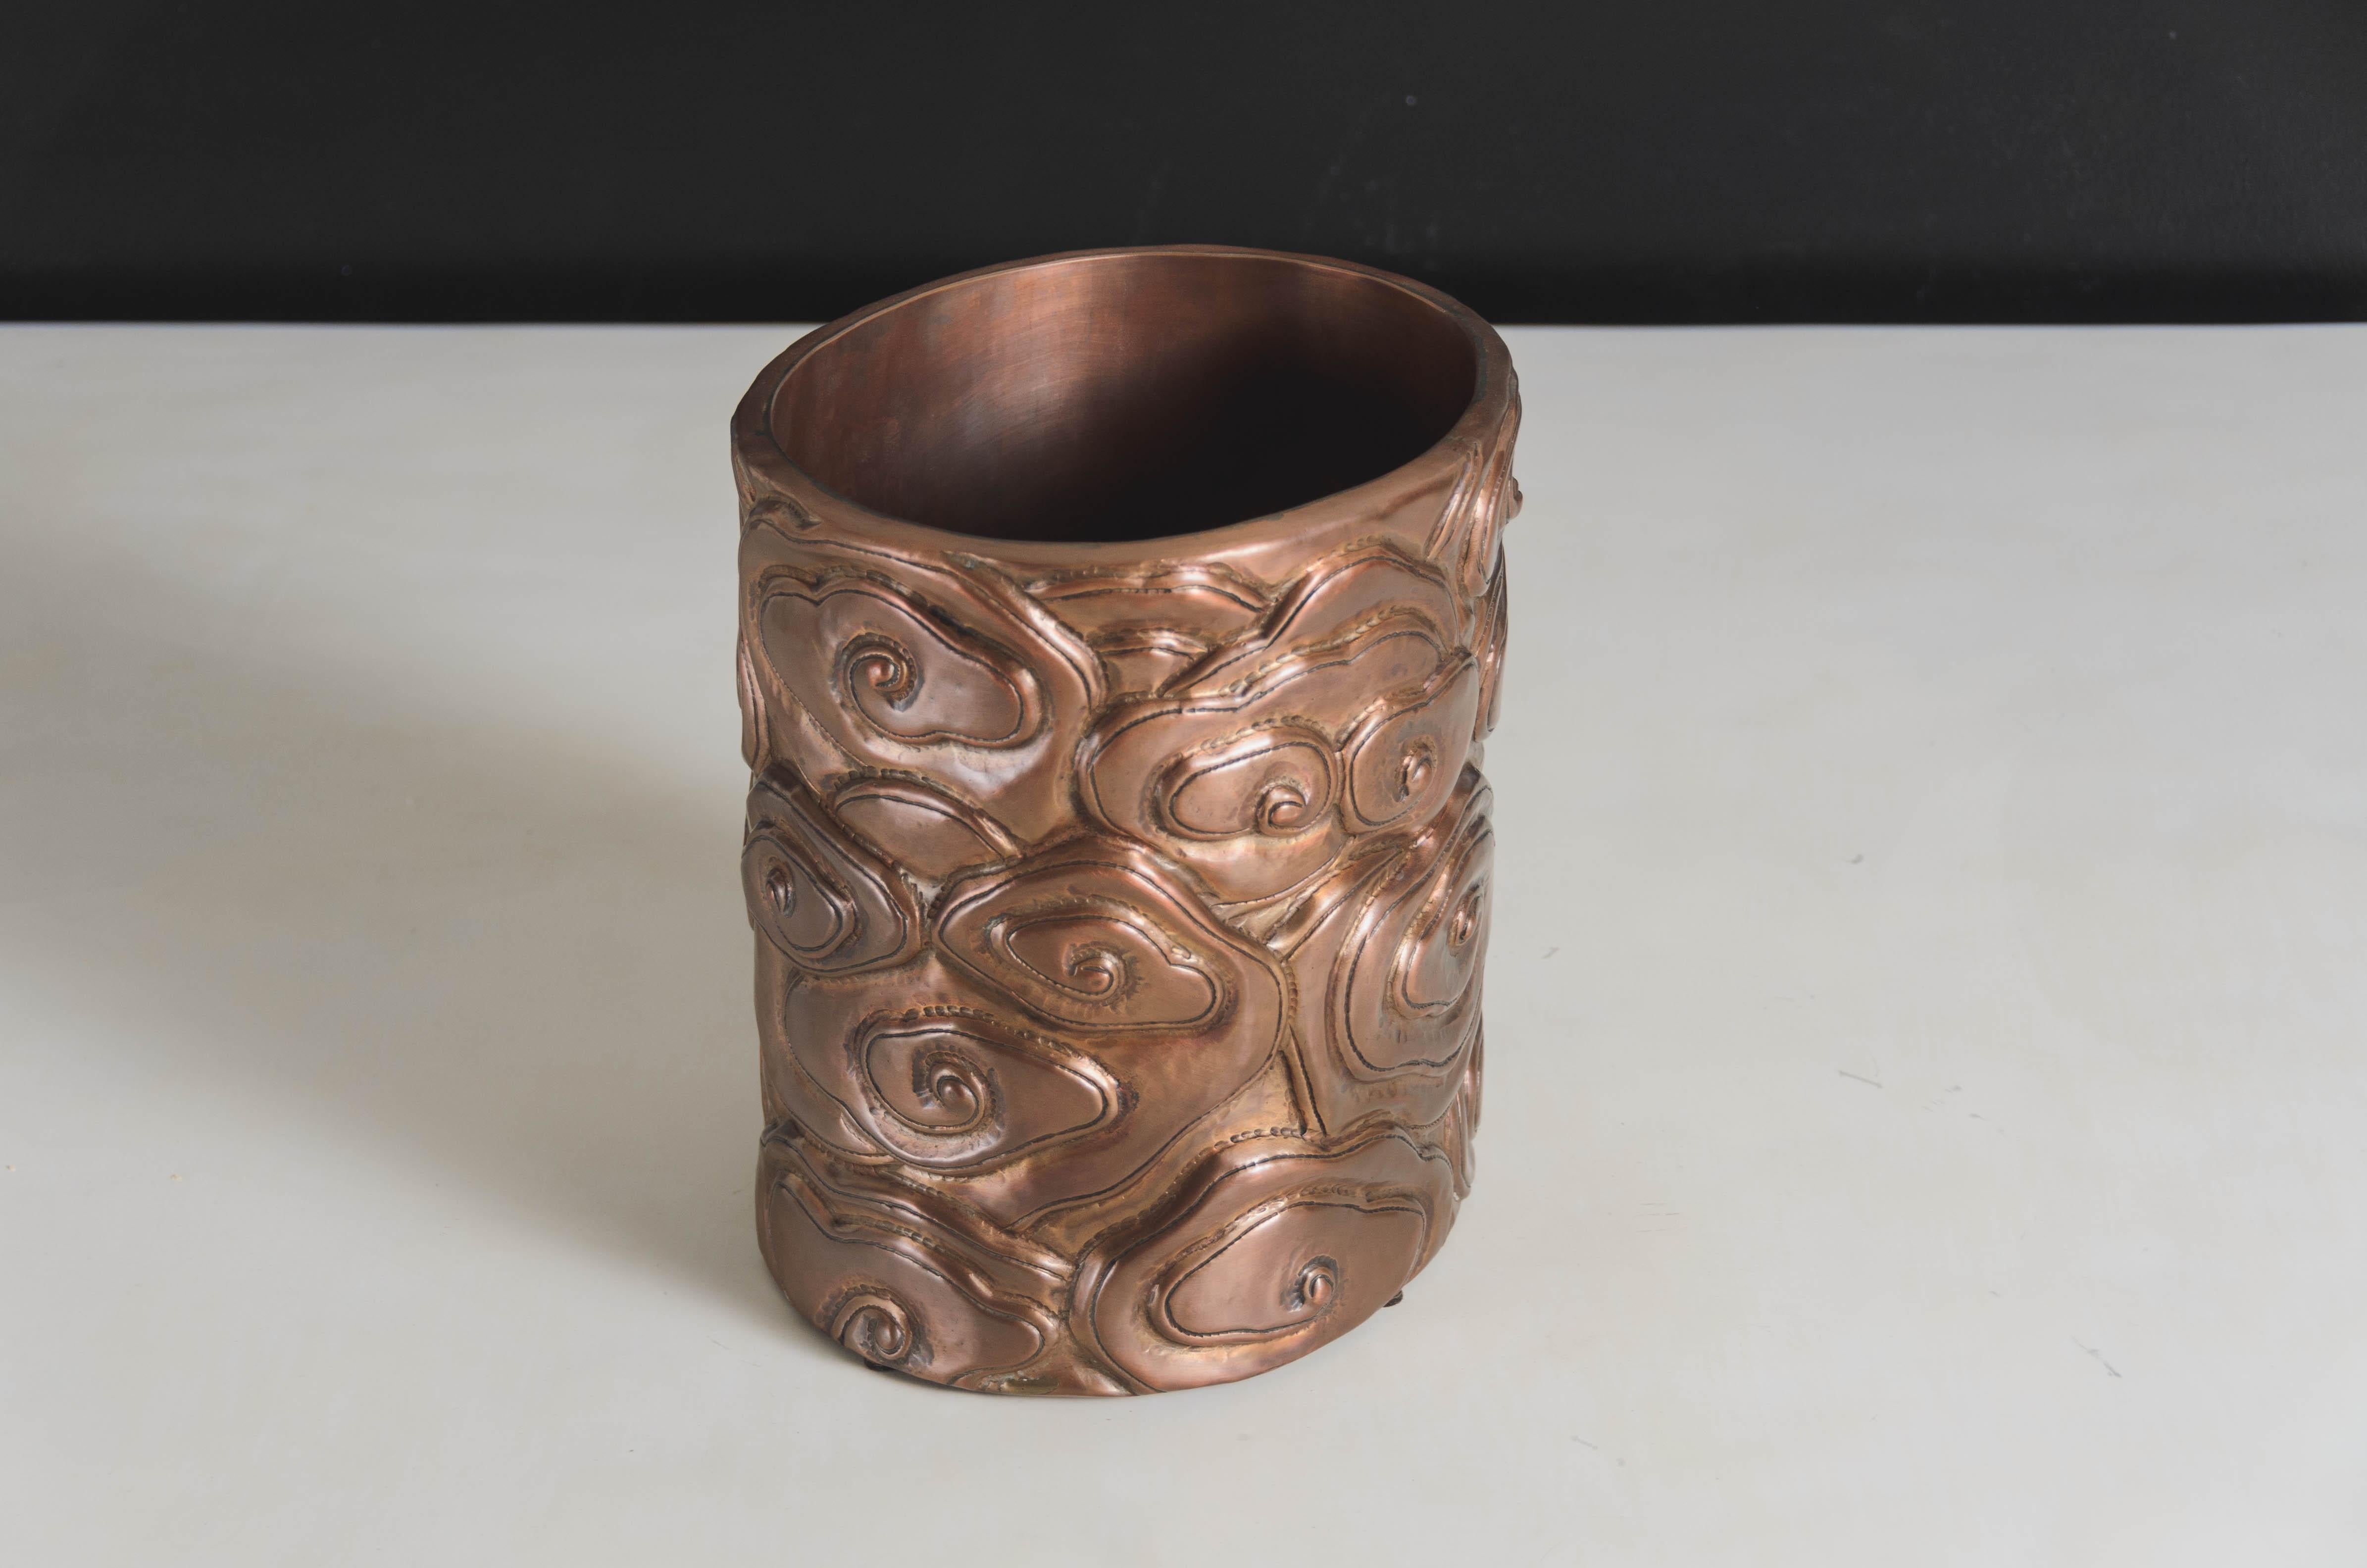 Cloud design brushpot
Antique copper
Hand repoussé
Limited edition
Repoussé is the traditional art of hand-hammering decorative relief onto sheet metal. The technique originated around 800 BC between Asia and Europe and in Chinese historical